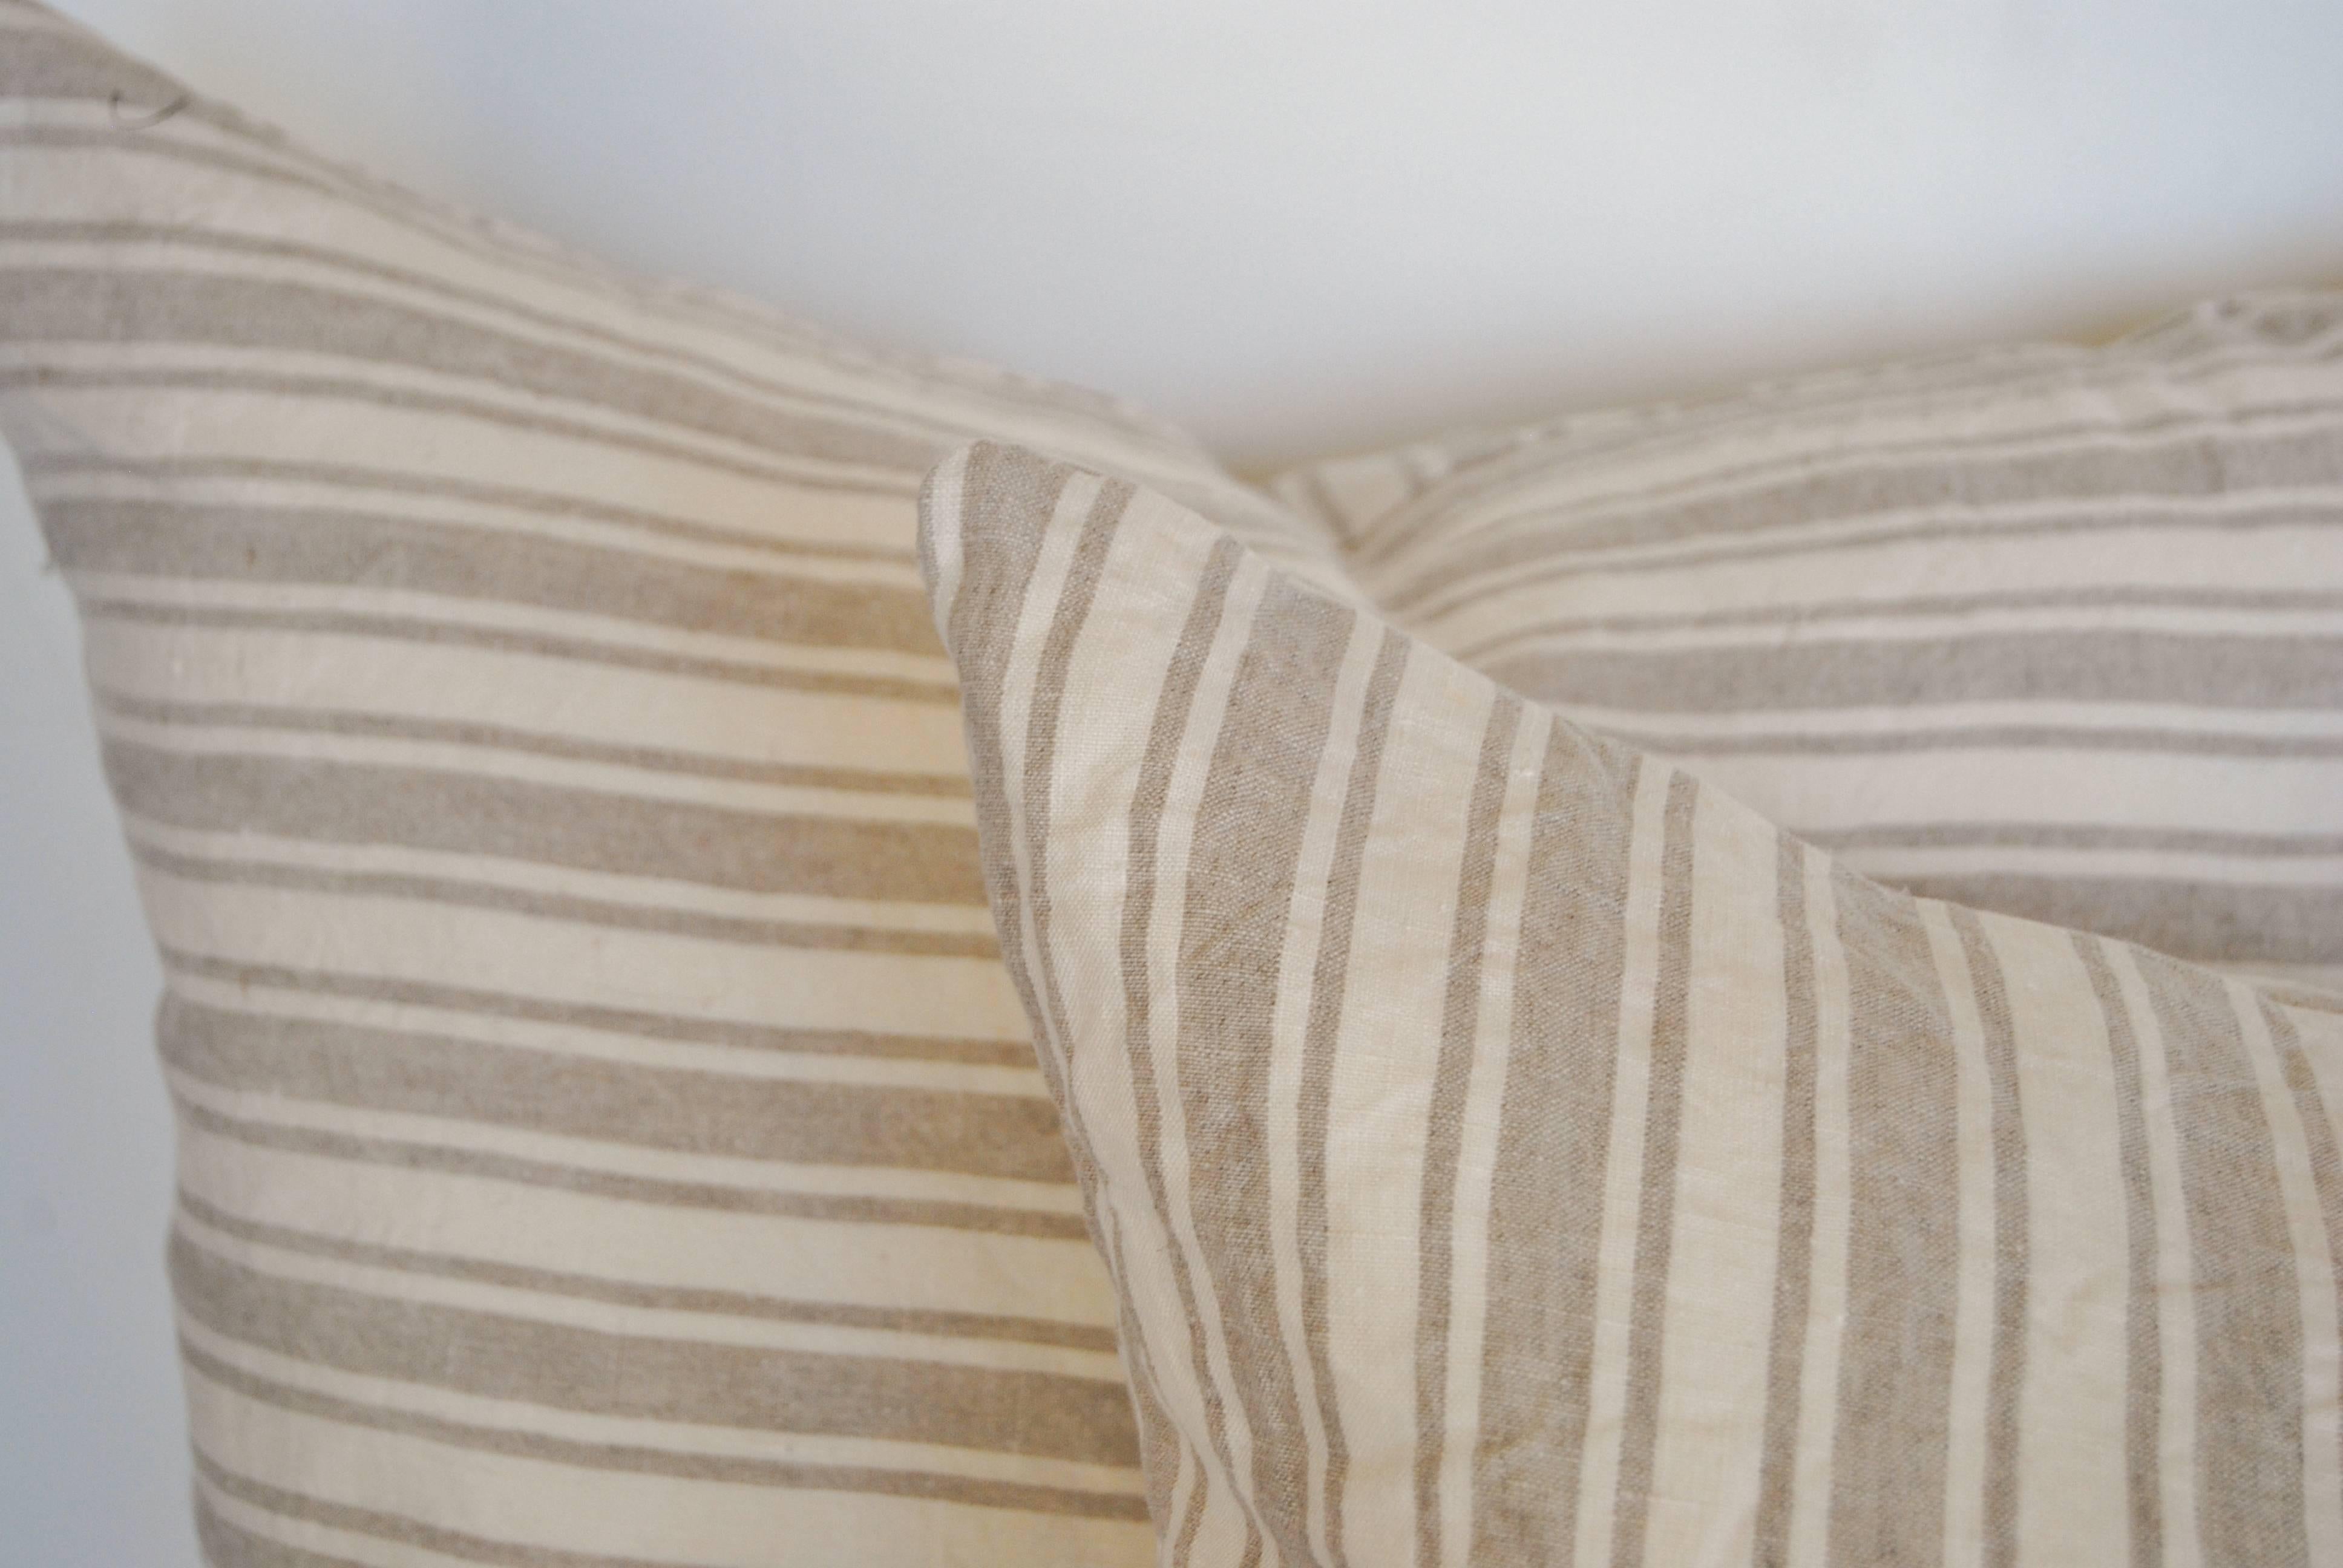 Custom pillows cut from a vintage French linen stripe textile. Stripe is on both sides of pillow. The textile has been freshly laundered and is in it's original wrinkled linen state. The pillows are filled with an insert of 50/50 down and feathers